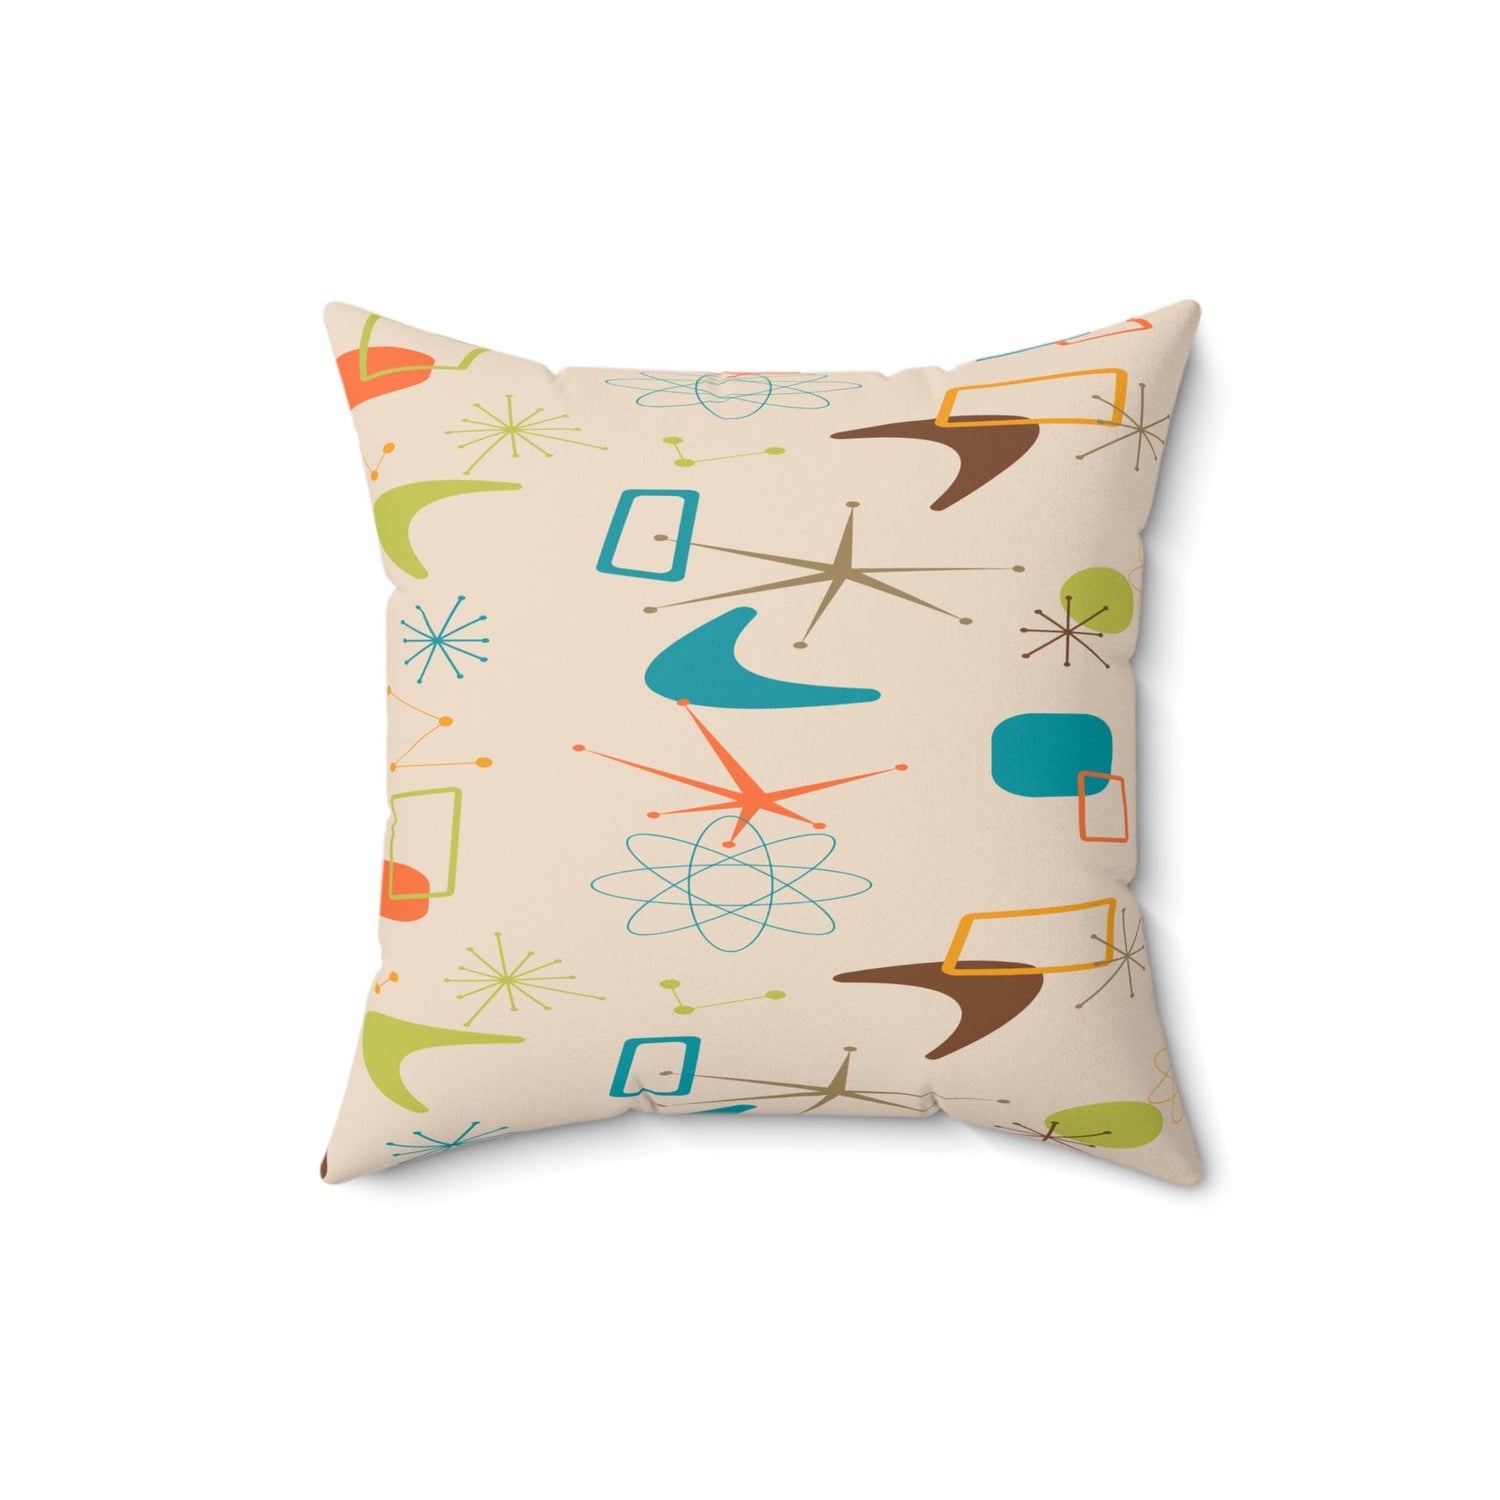 Kate McEnroe New York 50s Mid Century Modern Boomerang Starburst Throw Pillow with Insert, Retro MCM Beige, Orange, Teal, Lime, Living Room, Bedroom Accent PillowThrow Pillows30863447366434392487